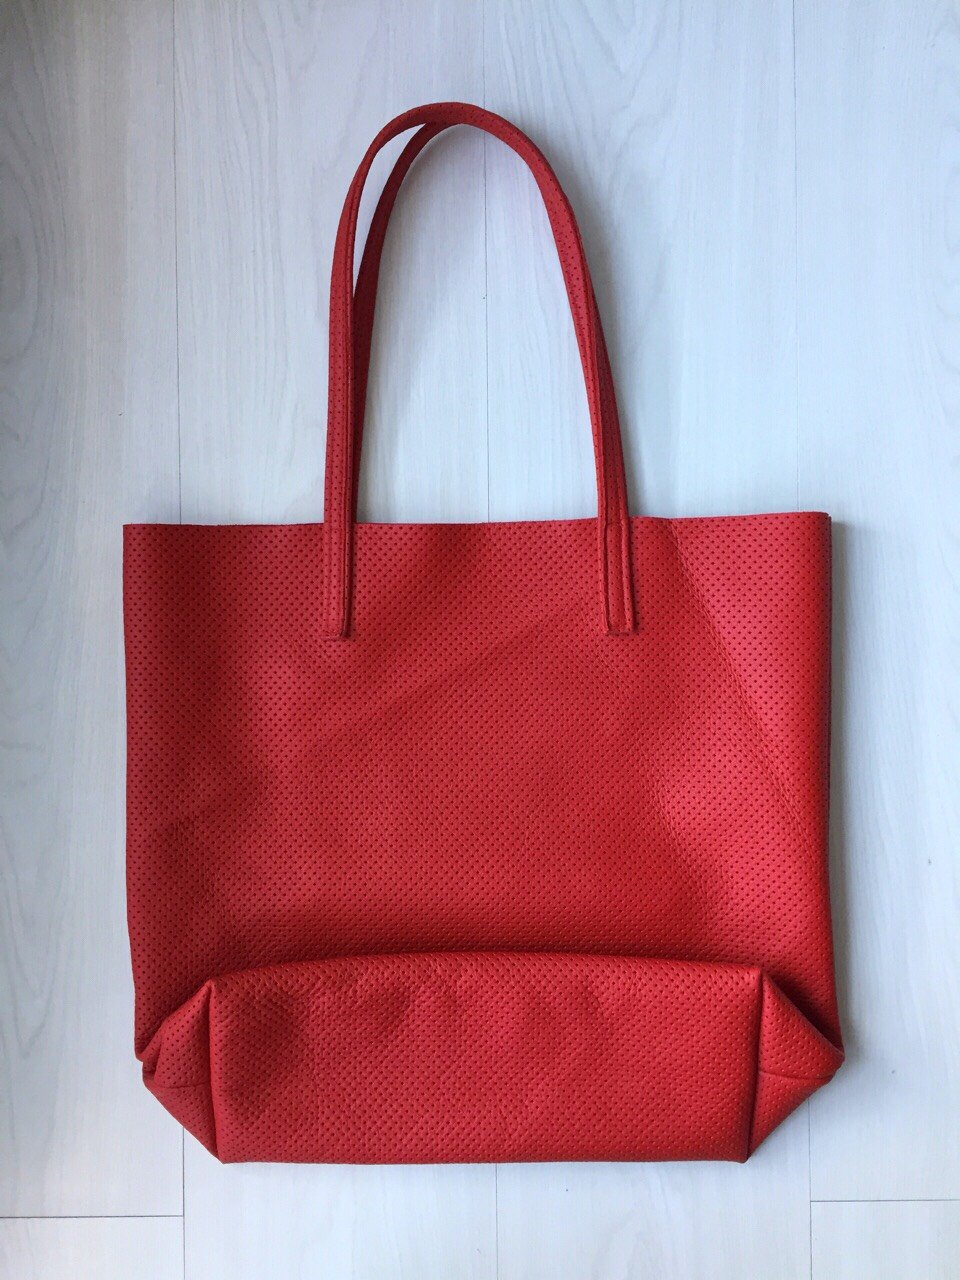 Raw Leather Tote Bag - Red Perforated